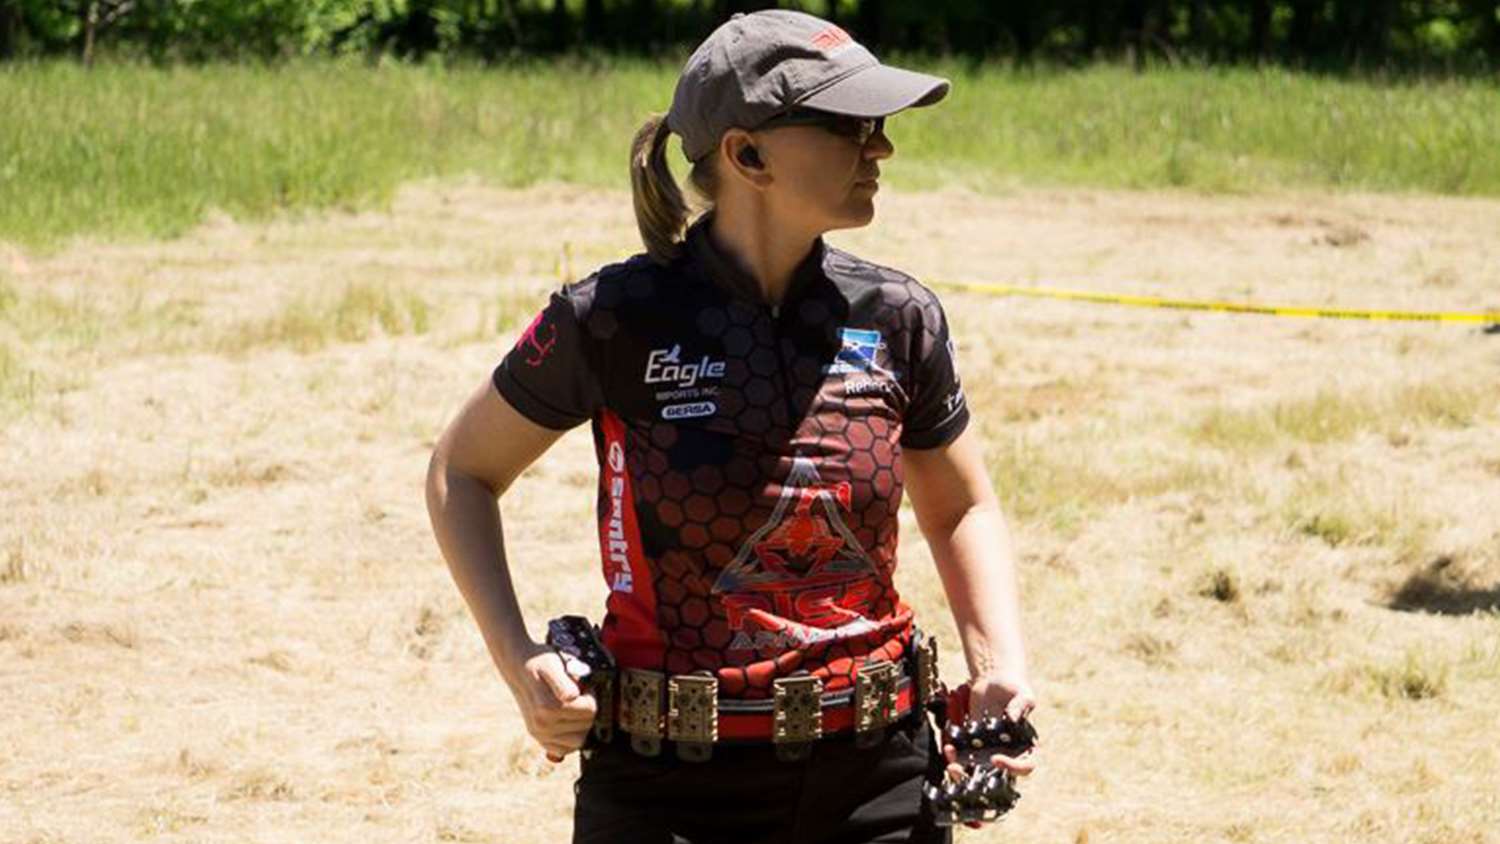 Rebecca King says she enjoys competitive shooting for sport and recreation